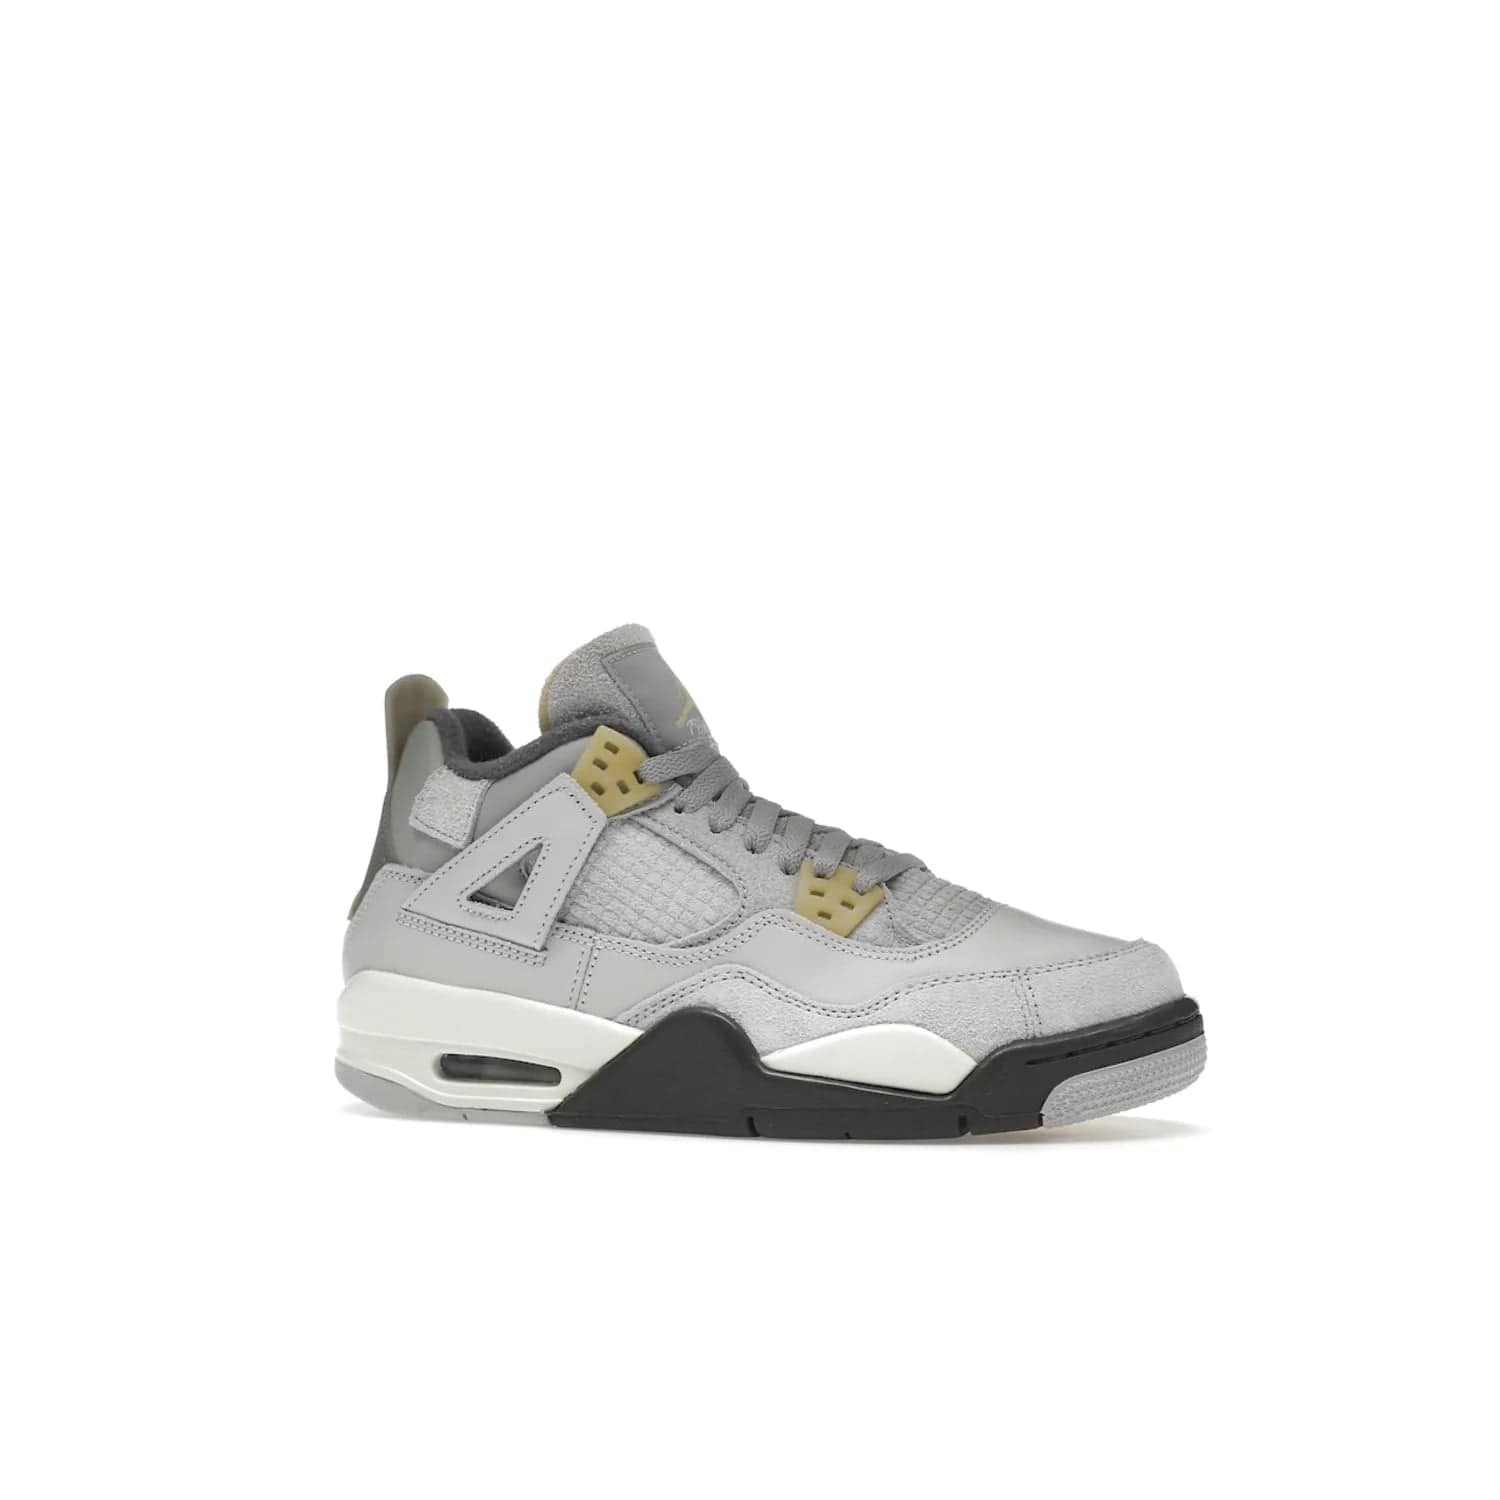 Jordan 4 Retro SE Craft Photon Dust (GS) - Image 3 - Only at www.BallersClubKickz.com - Shop the Jordan 4 Retro SE Craft Photon Dust (GS), the ultimate mix of style and comfort. With photonic dust, pale vanilla, off-white, grey fog, flat pewter and sail colorway, foam midsole, and rubber outsole, don't miss this special edition Jordan 4 releasing Feb 11, 2023.